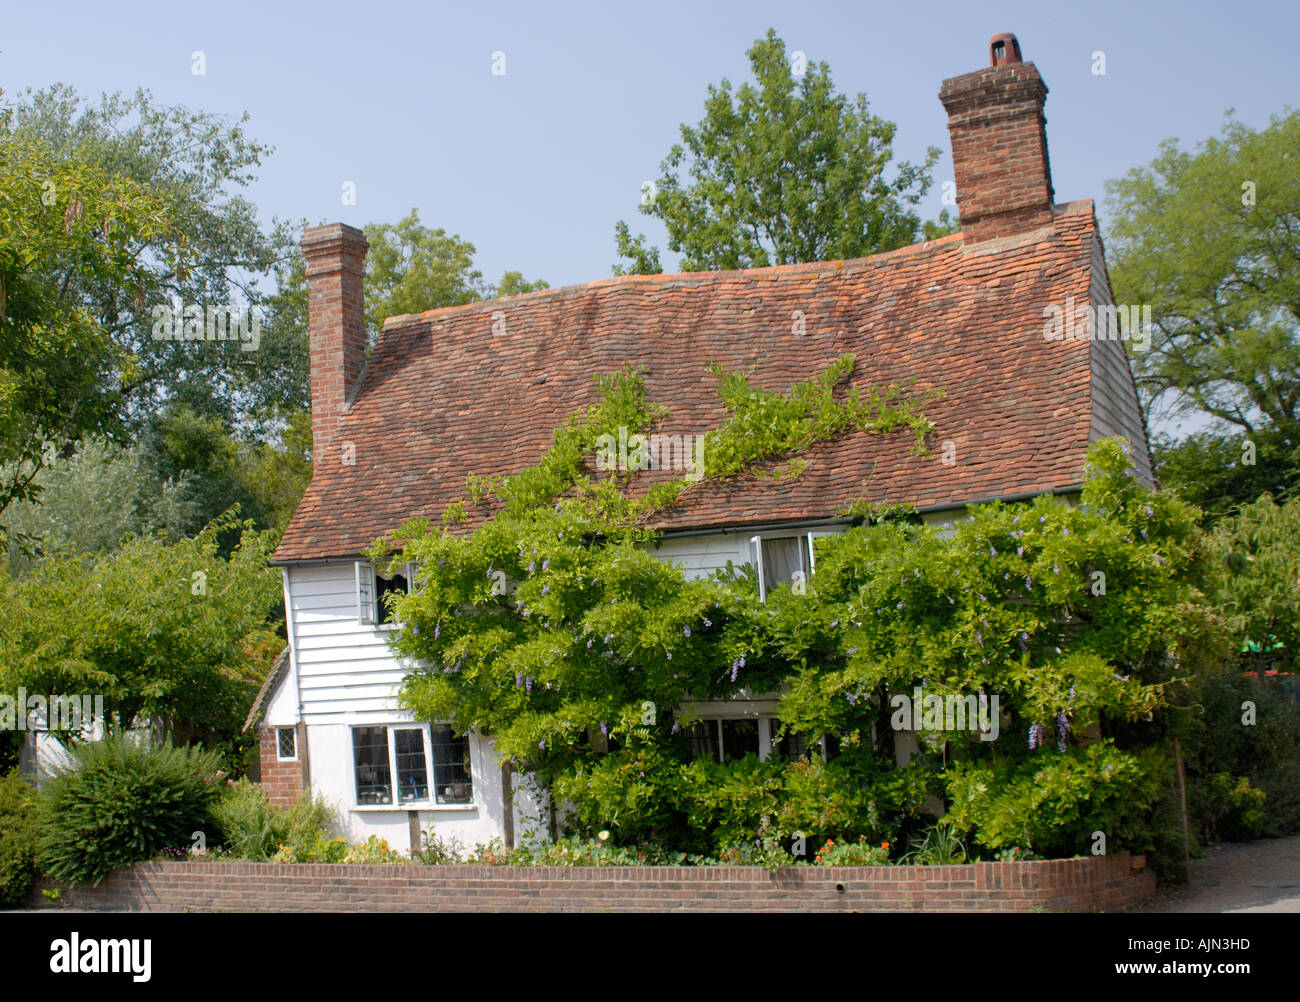 Typical Kent cottage of white weather board and peg tile roof covered in wisteria Smarden Kent UK 21 July 2006 Stock Photo